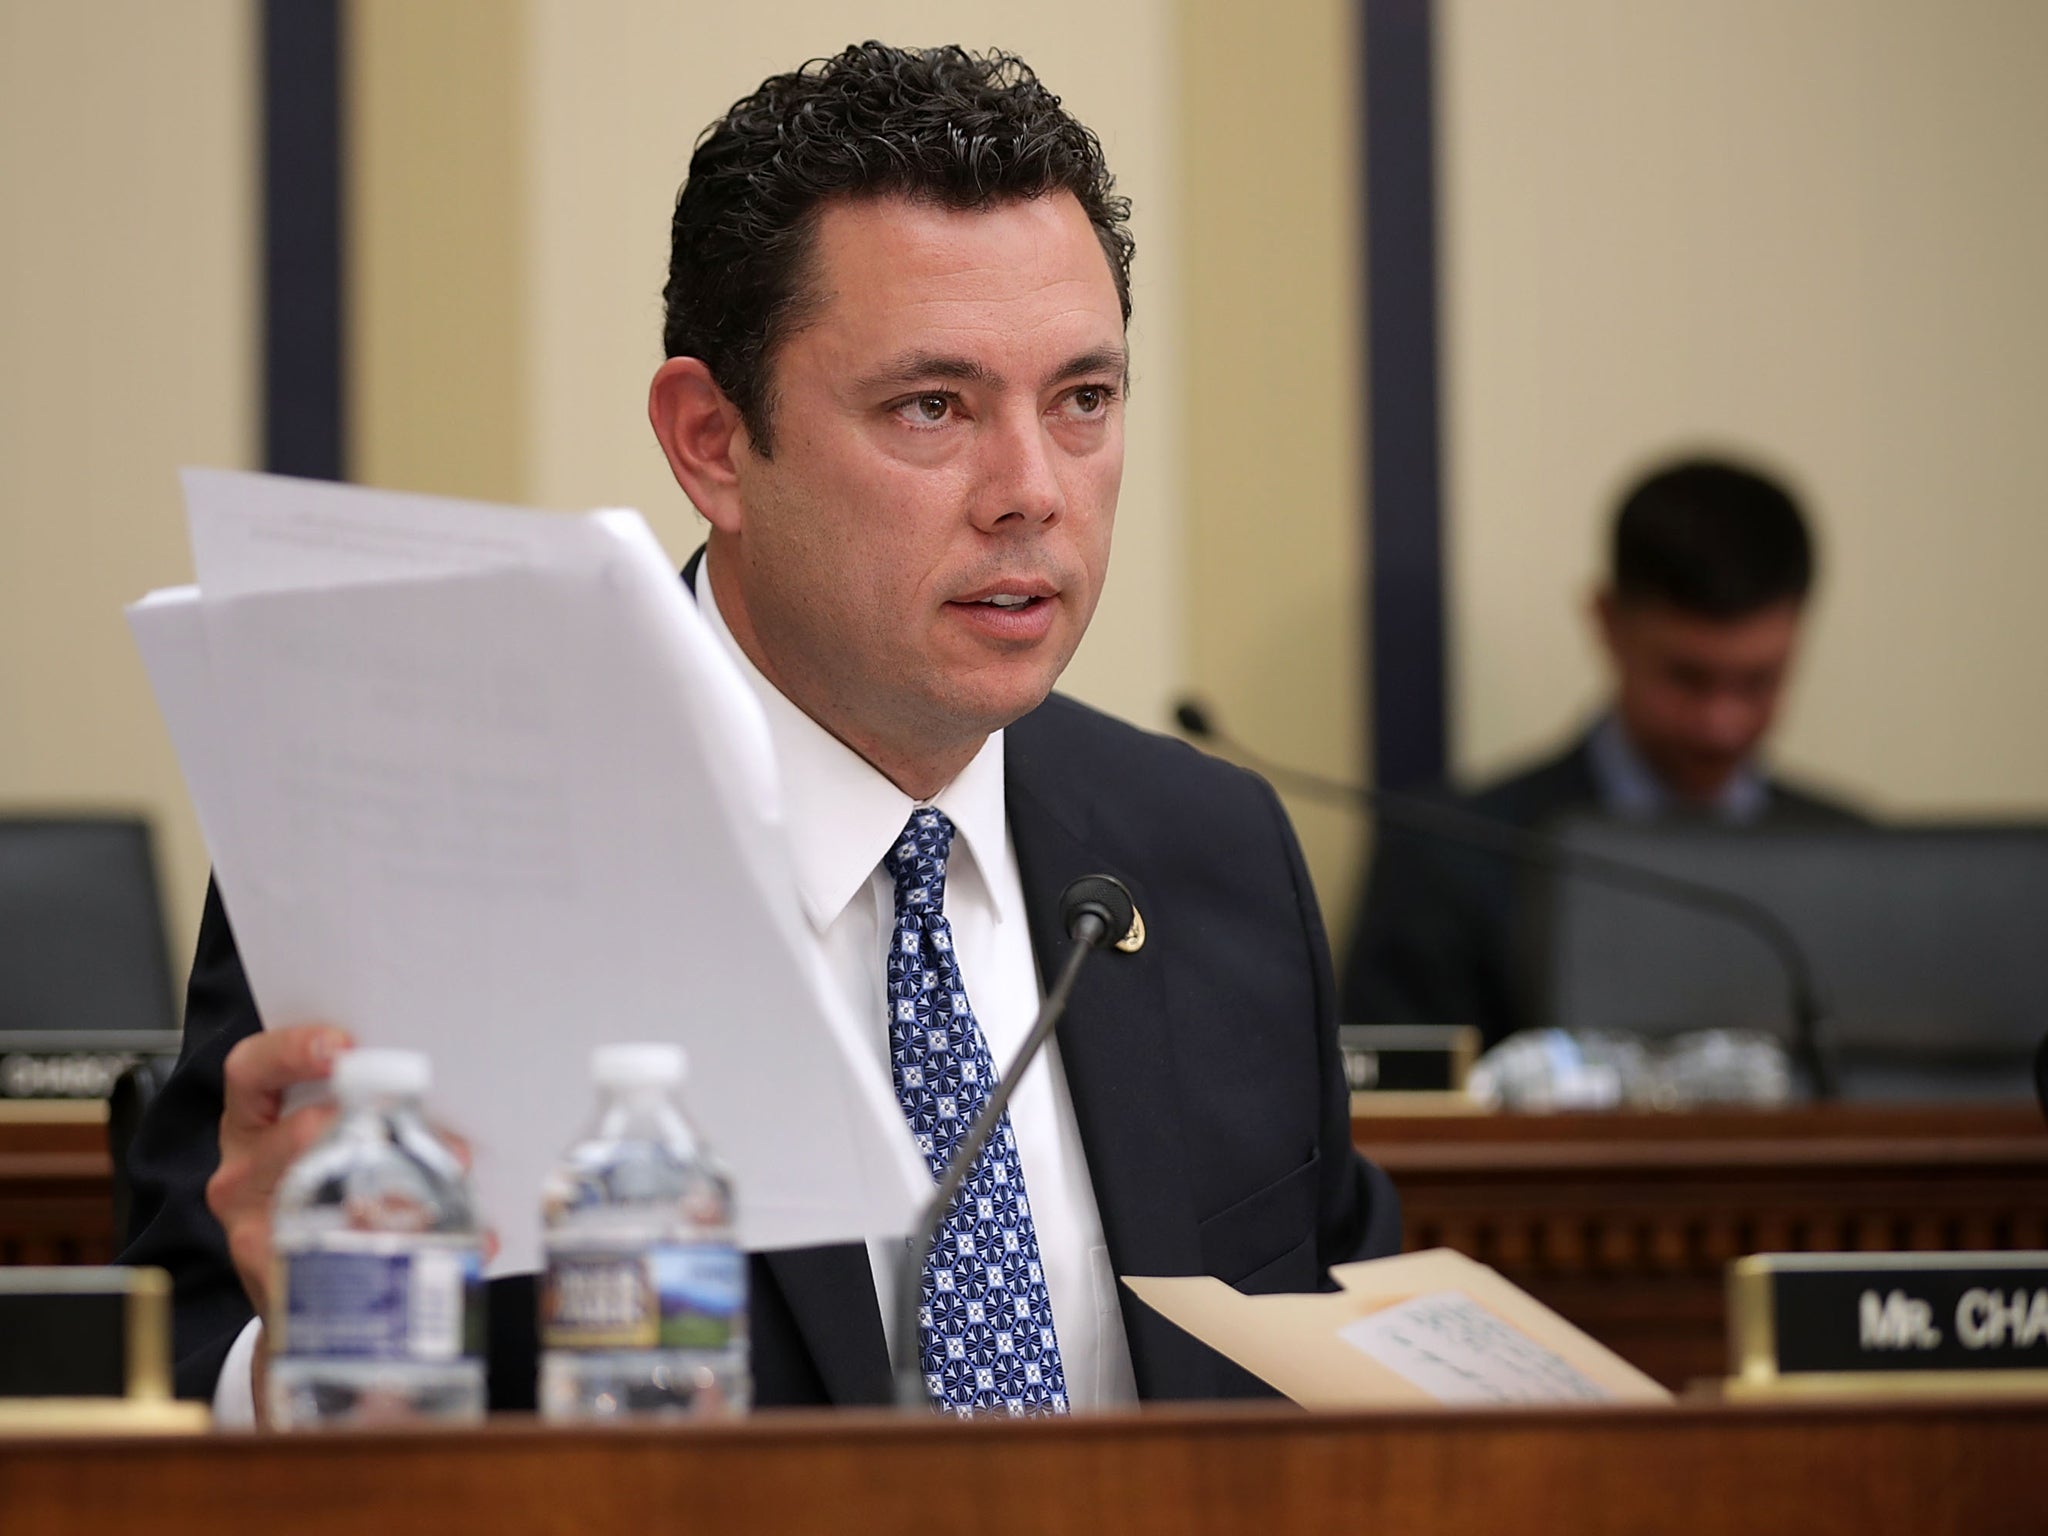 Mr Chaffetz implied that whether you have access to healthcare comes down to prioritizing your finances